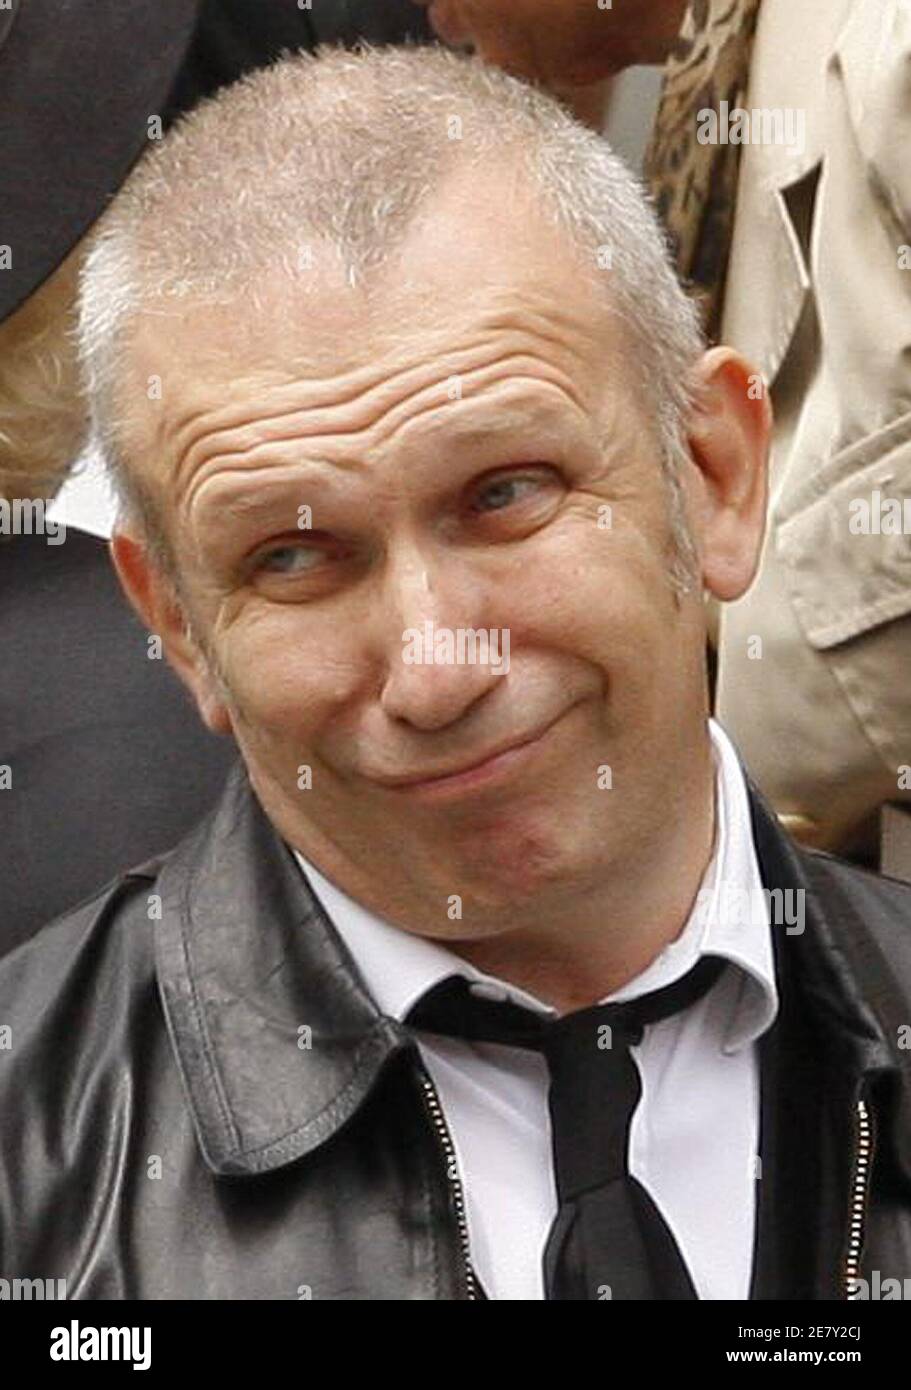 French fashion designer Jean-Paul Gaultier arrives at the funeral service  for late fashion designer Yves Saint Laurent in Paris, June 5, 2008. Saint  Laurent was part of a distinguished line of French